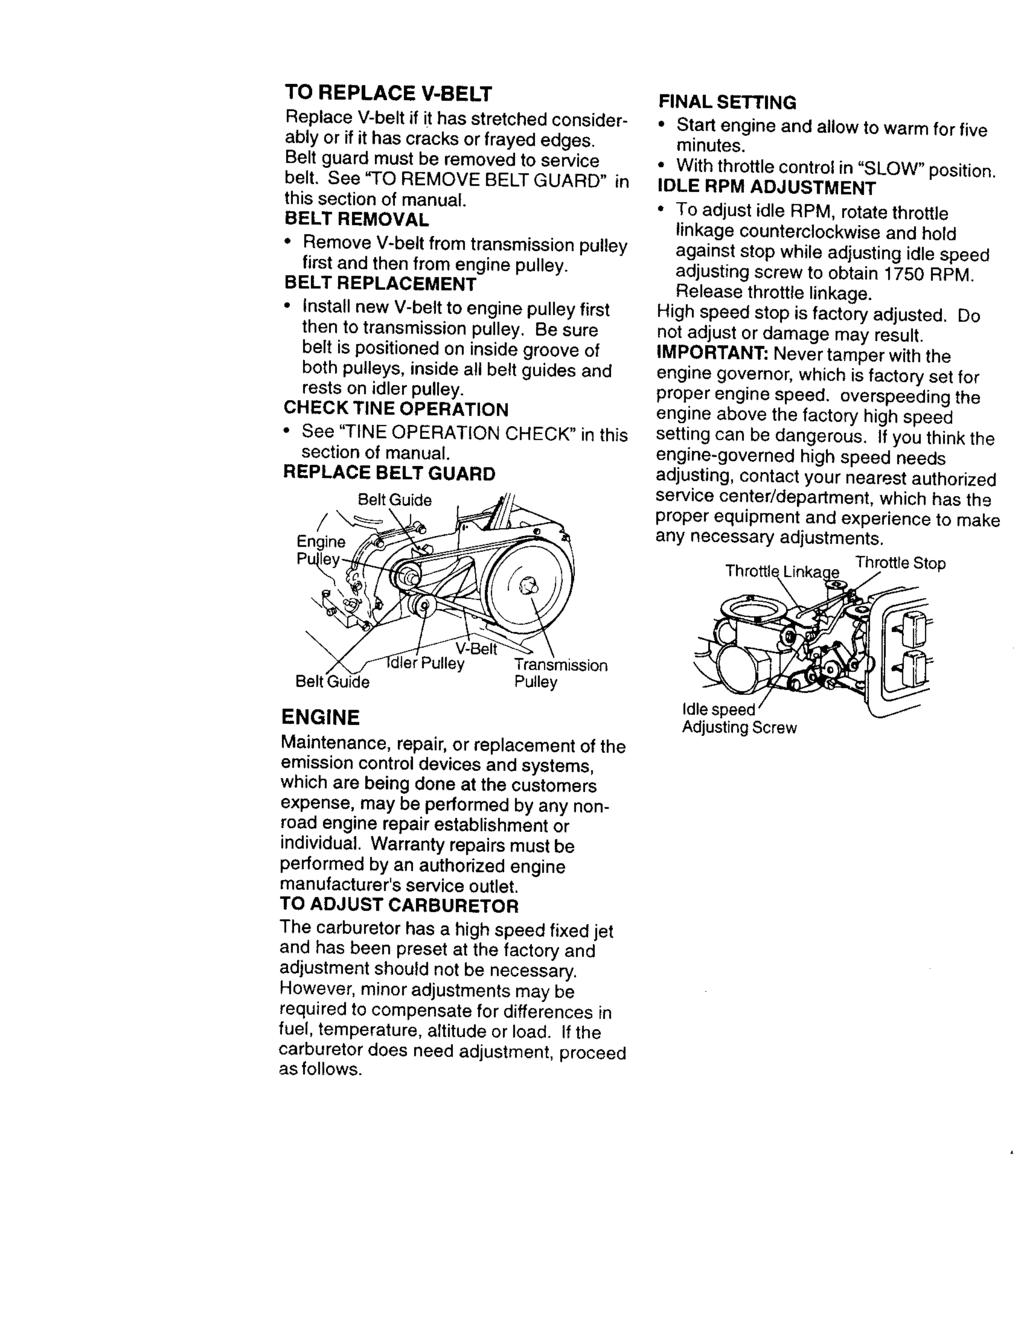 TO REPLACE V-BELT Replace V-belt if it has stretched considerably or if it has cracks or frayed edges. Belt guard must be removed to service belt. See "TO REMOVE BELT GUARD" in this section of manual.